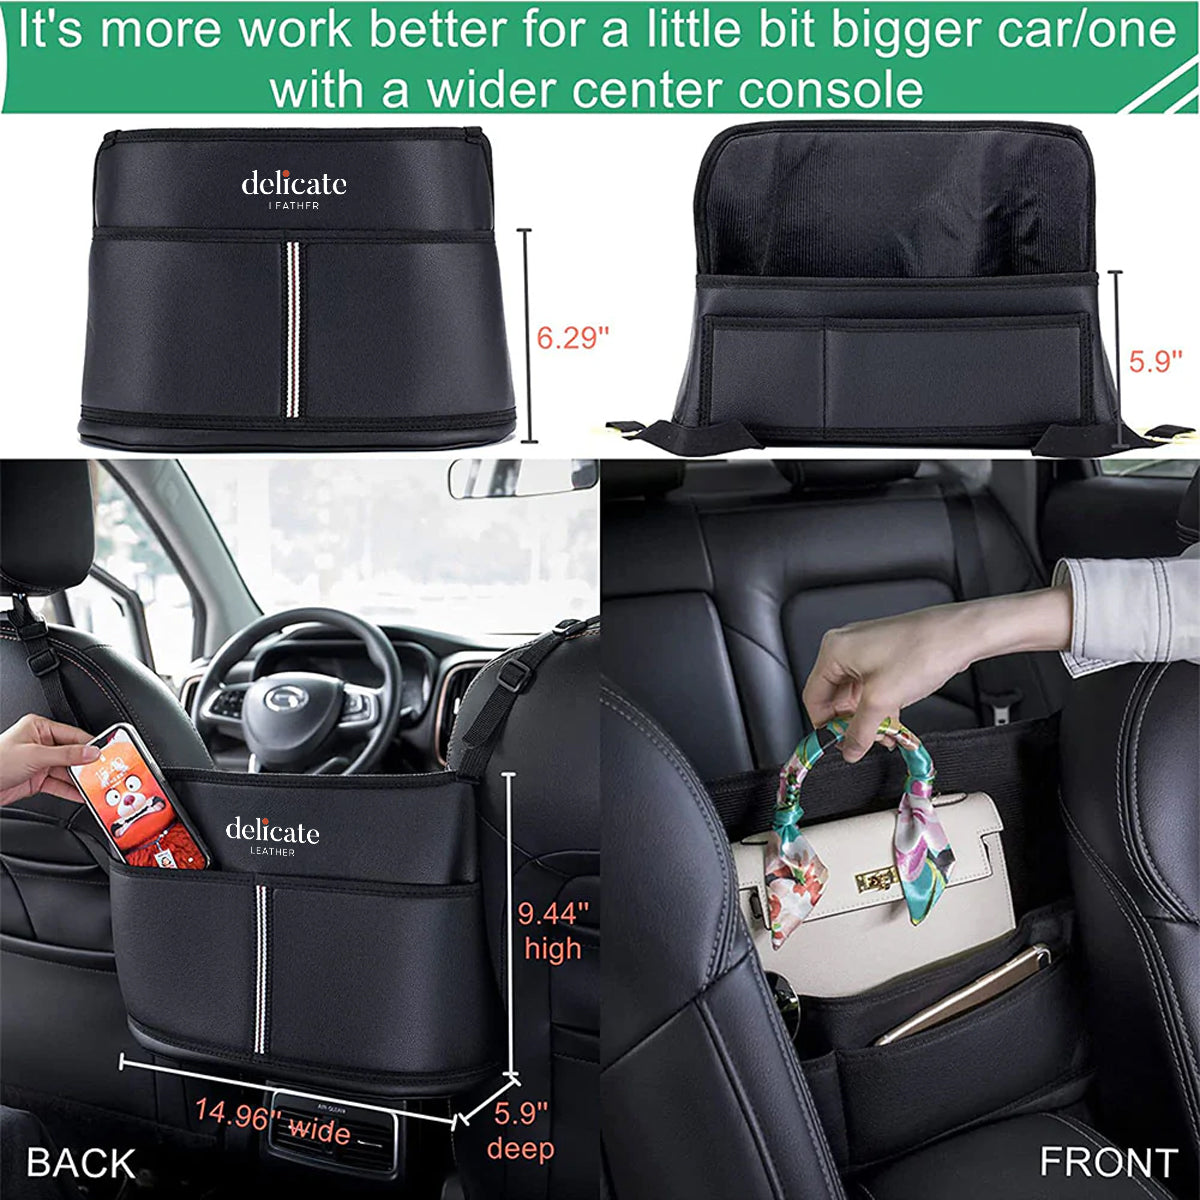 Delicate Leather Car Purse Holder for Car Handbag Holder Between Seats Premium PU Leather, Custom For Your Cars, Auto Driver Or Passenger Accessories Organizer, Hanging Car Purse Storage Pocket Back Seat Pet Barrier CH11991 - Delicate Leather